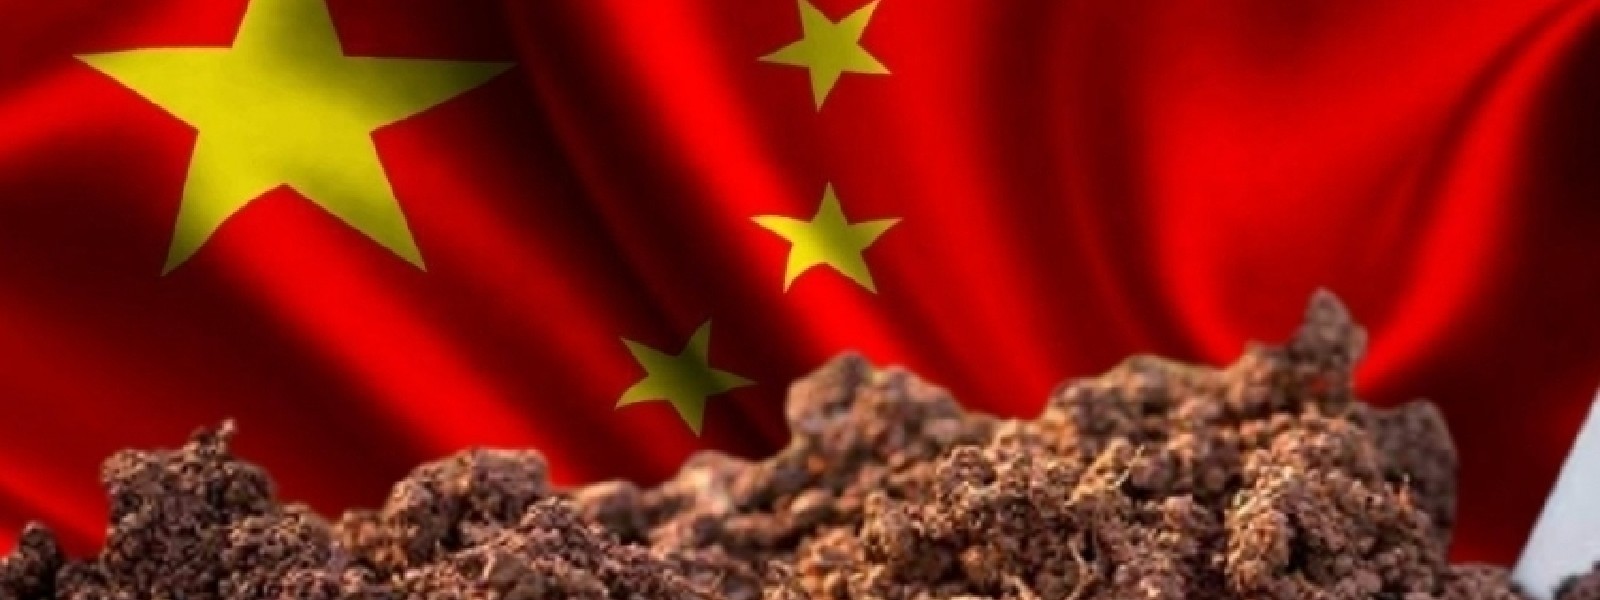 Chinese Fertilizer: Attorney General advises on recovering losses